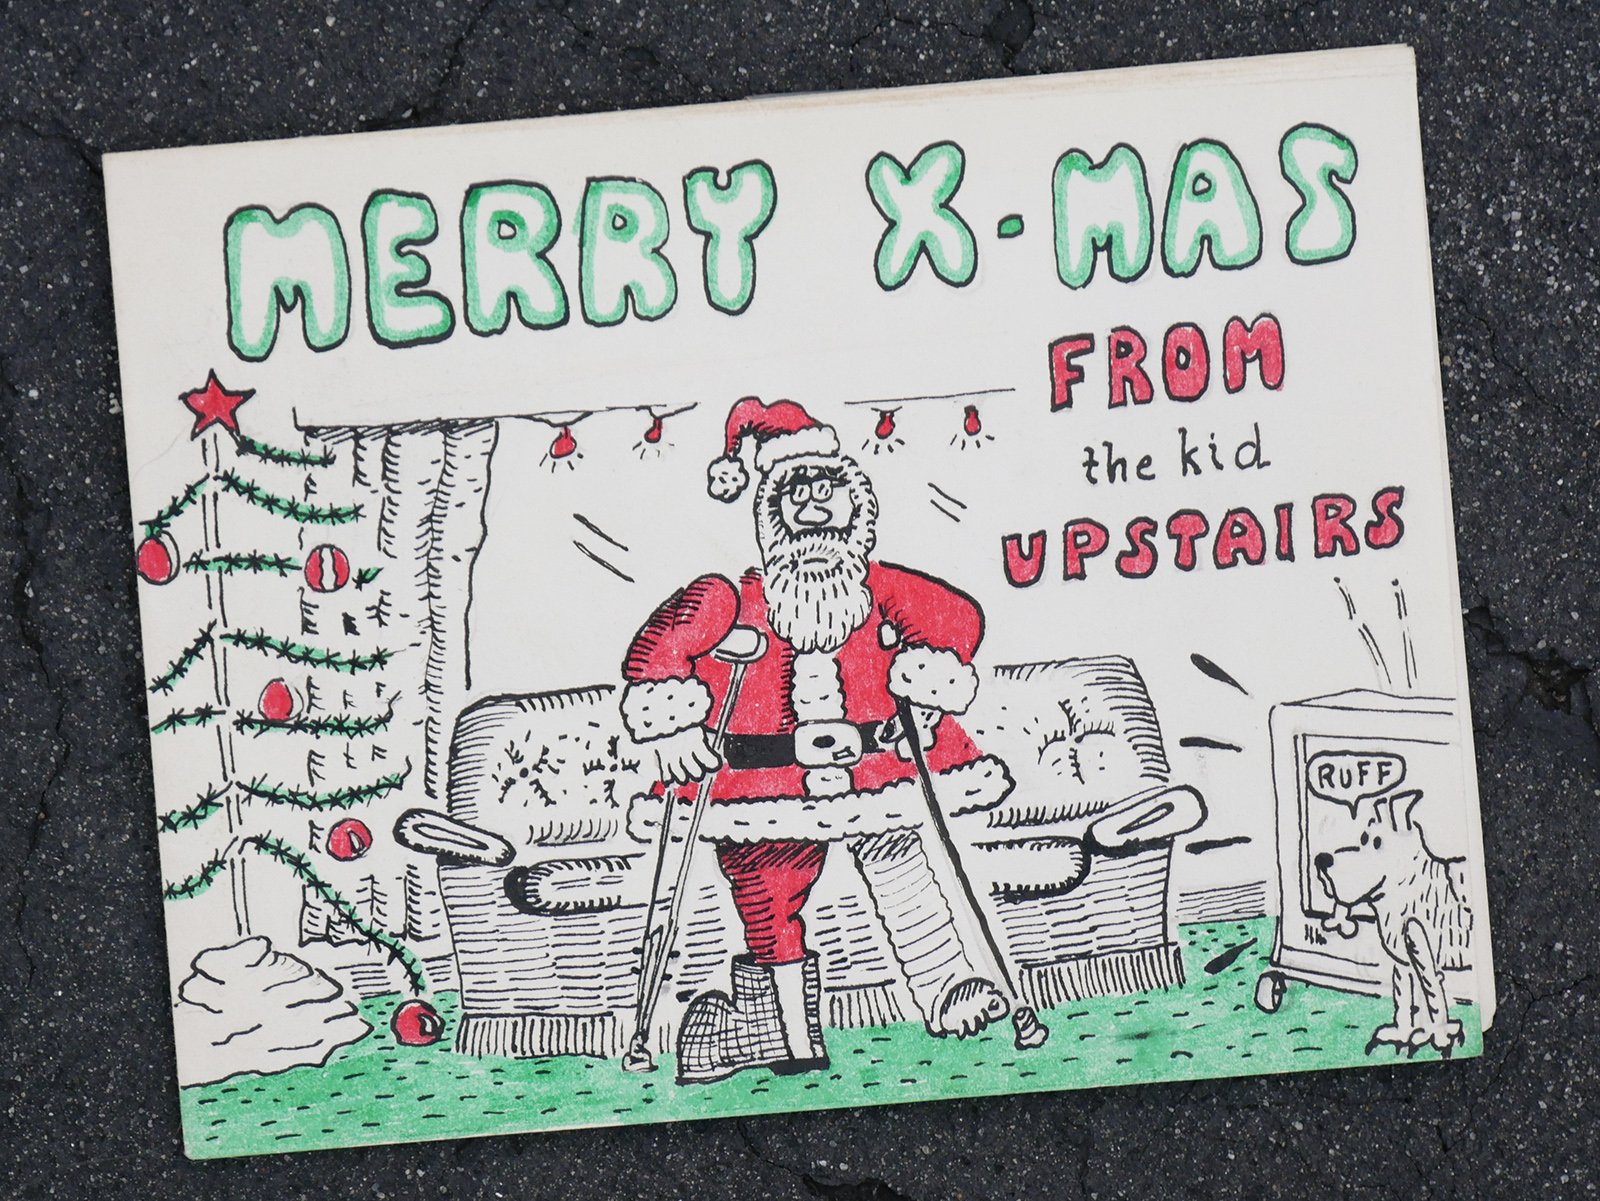 Handmade Christmas card for the family – from the kid upstairs AKA Bicycle Bill